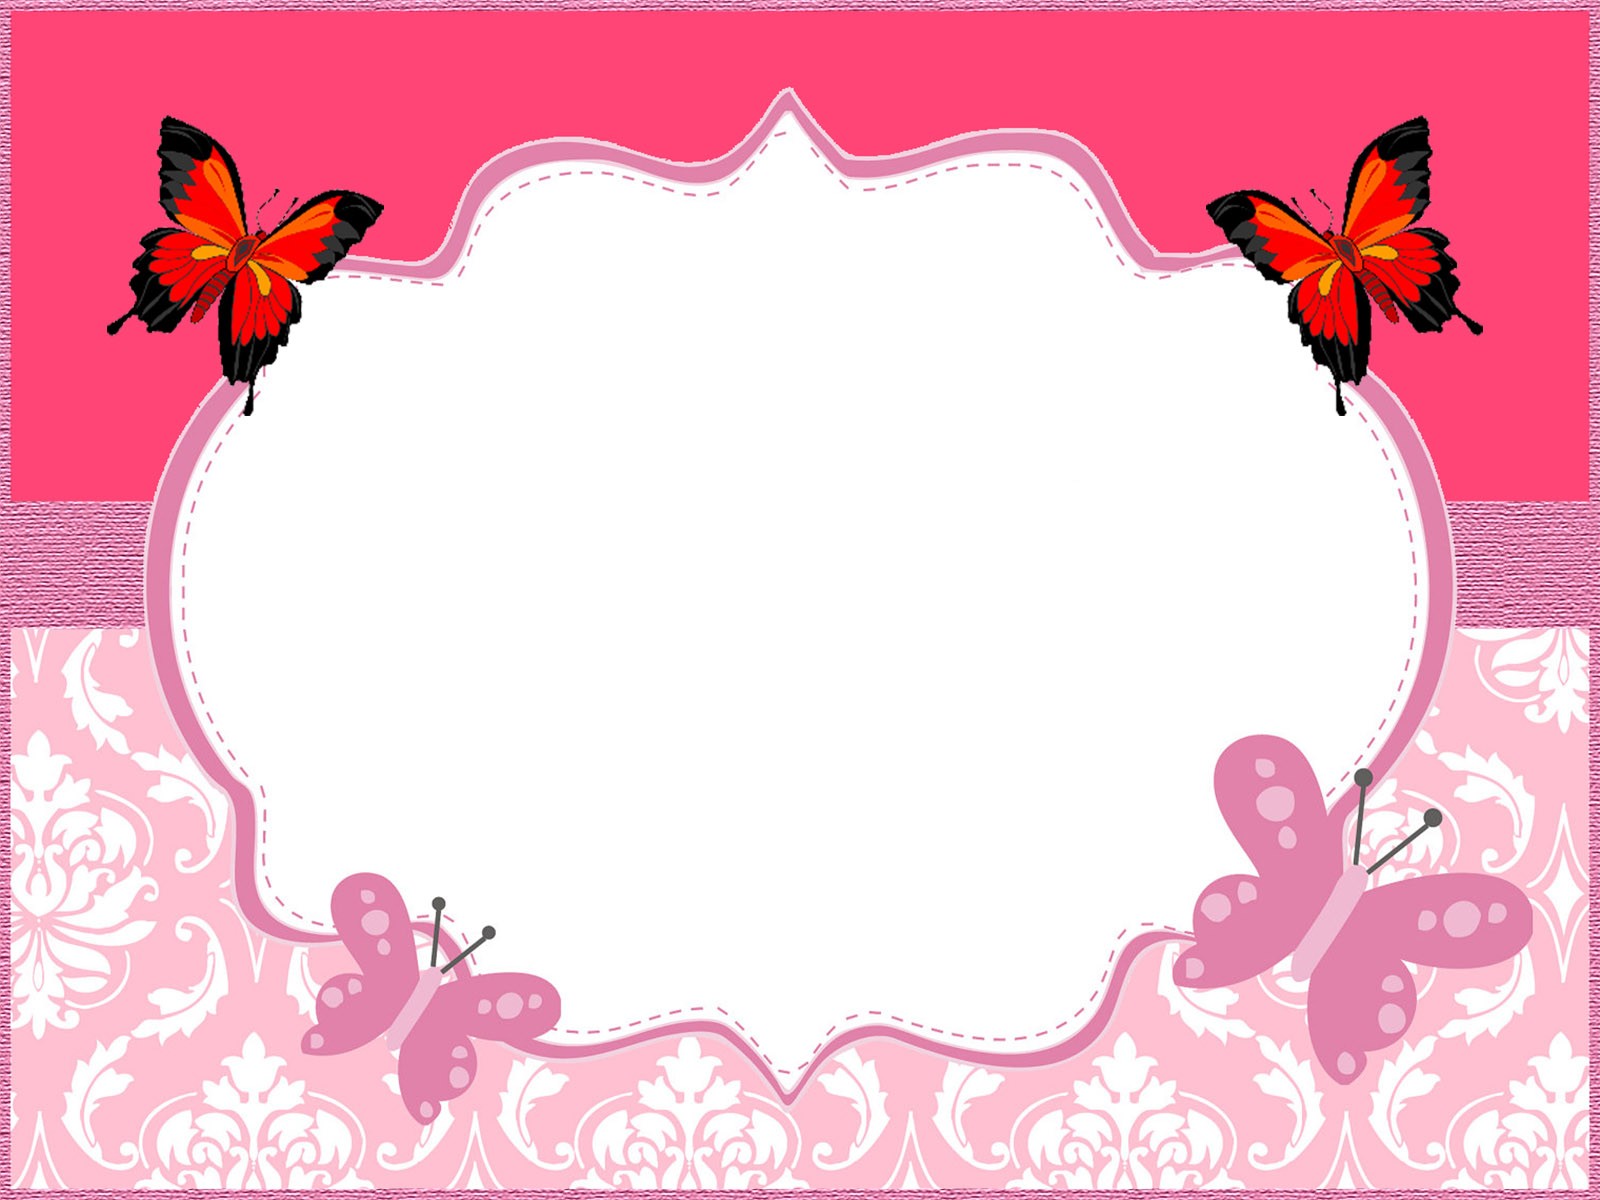 Butterfly Party Invitation Ideas And Free Invitation Templates Invitations Online